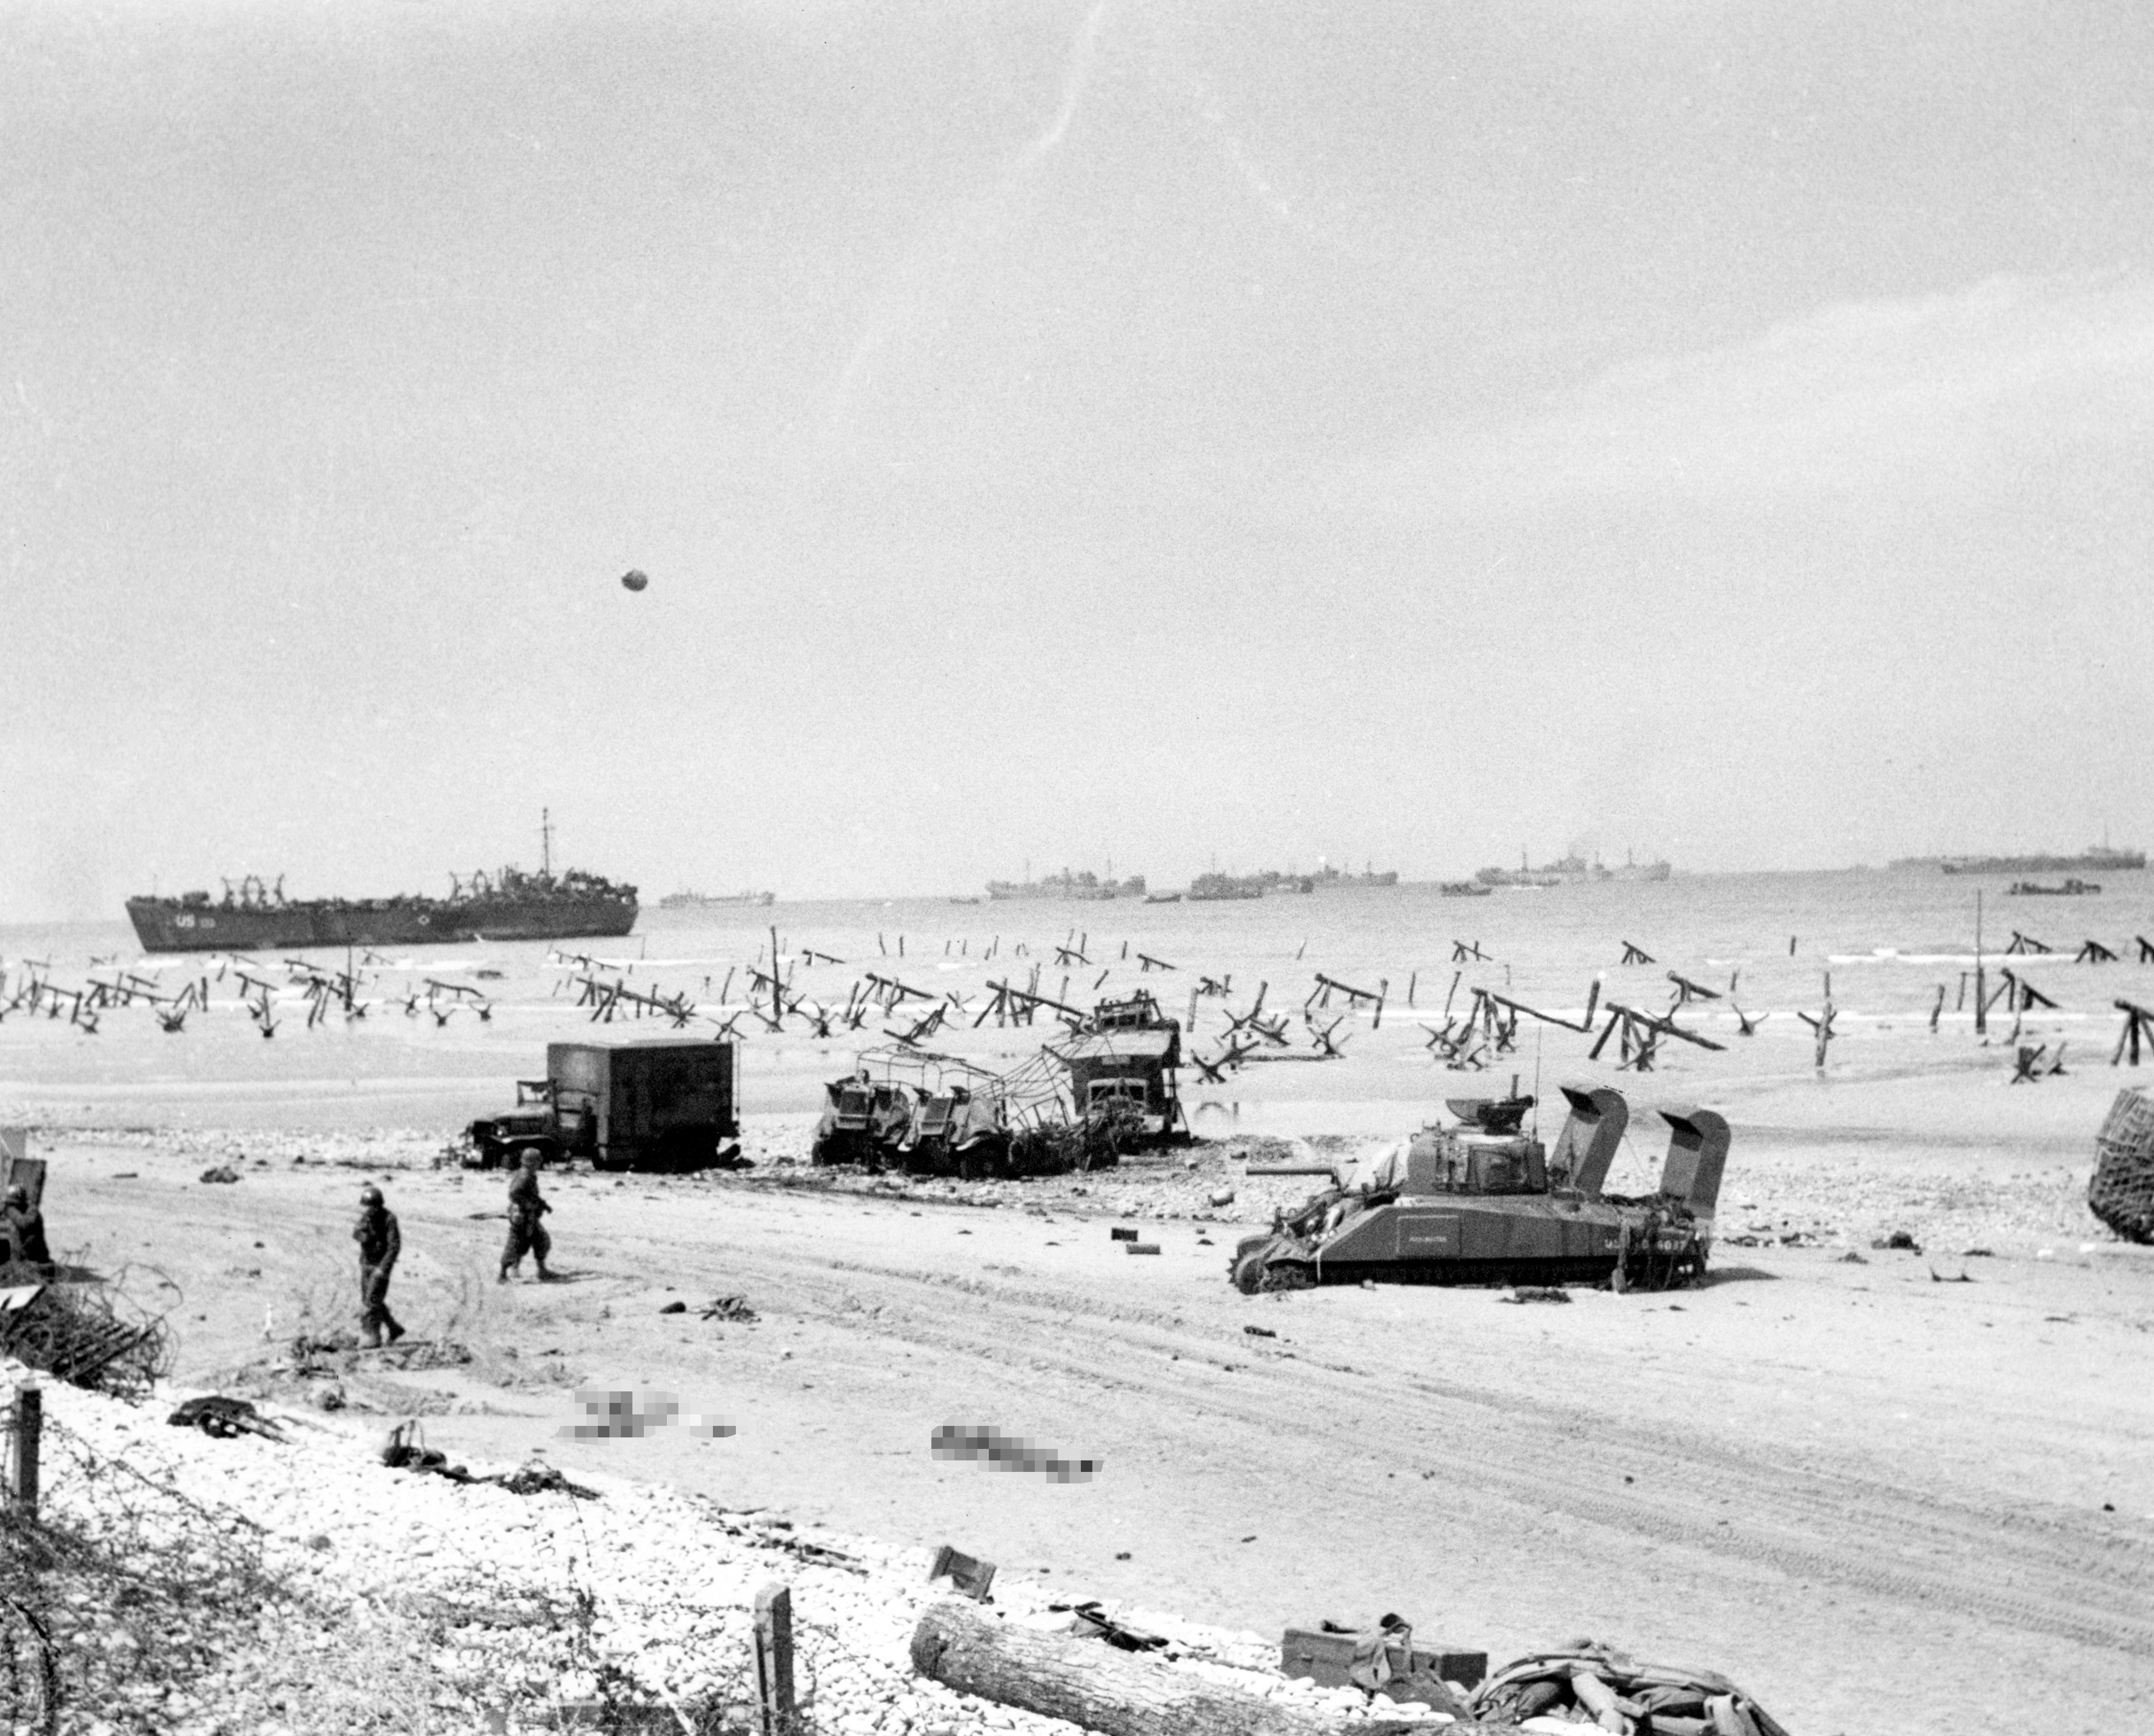 Image shows Omaha Beach on the afternoon of D-Day, with 21 BDS transmitter trucks and Landing Craft Tank